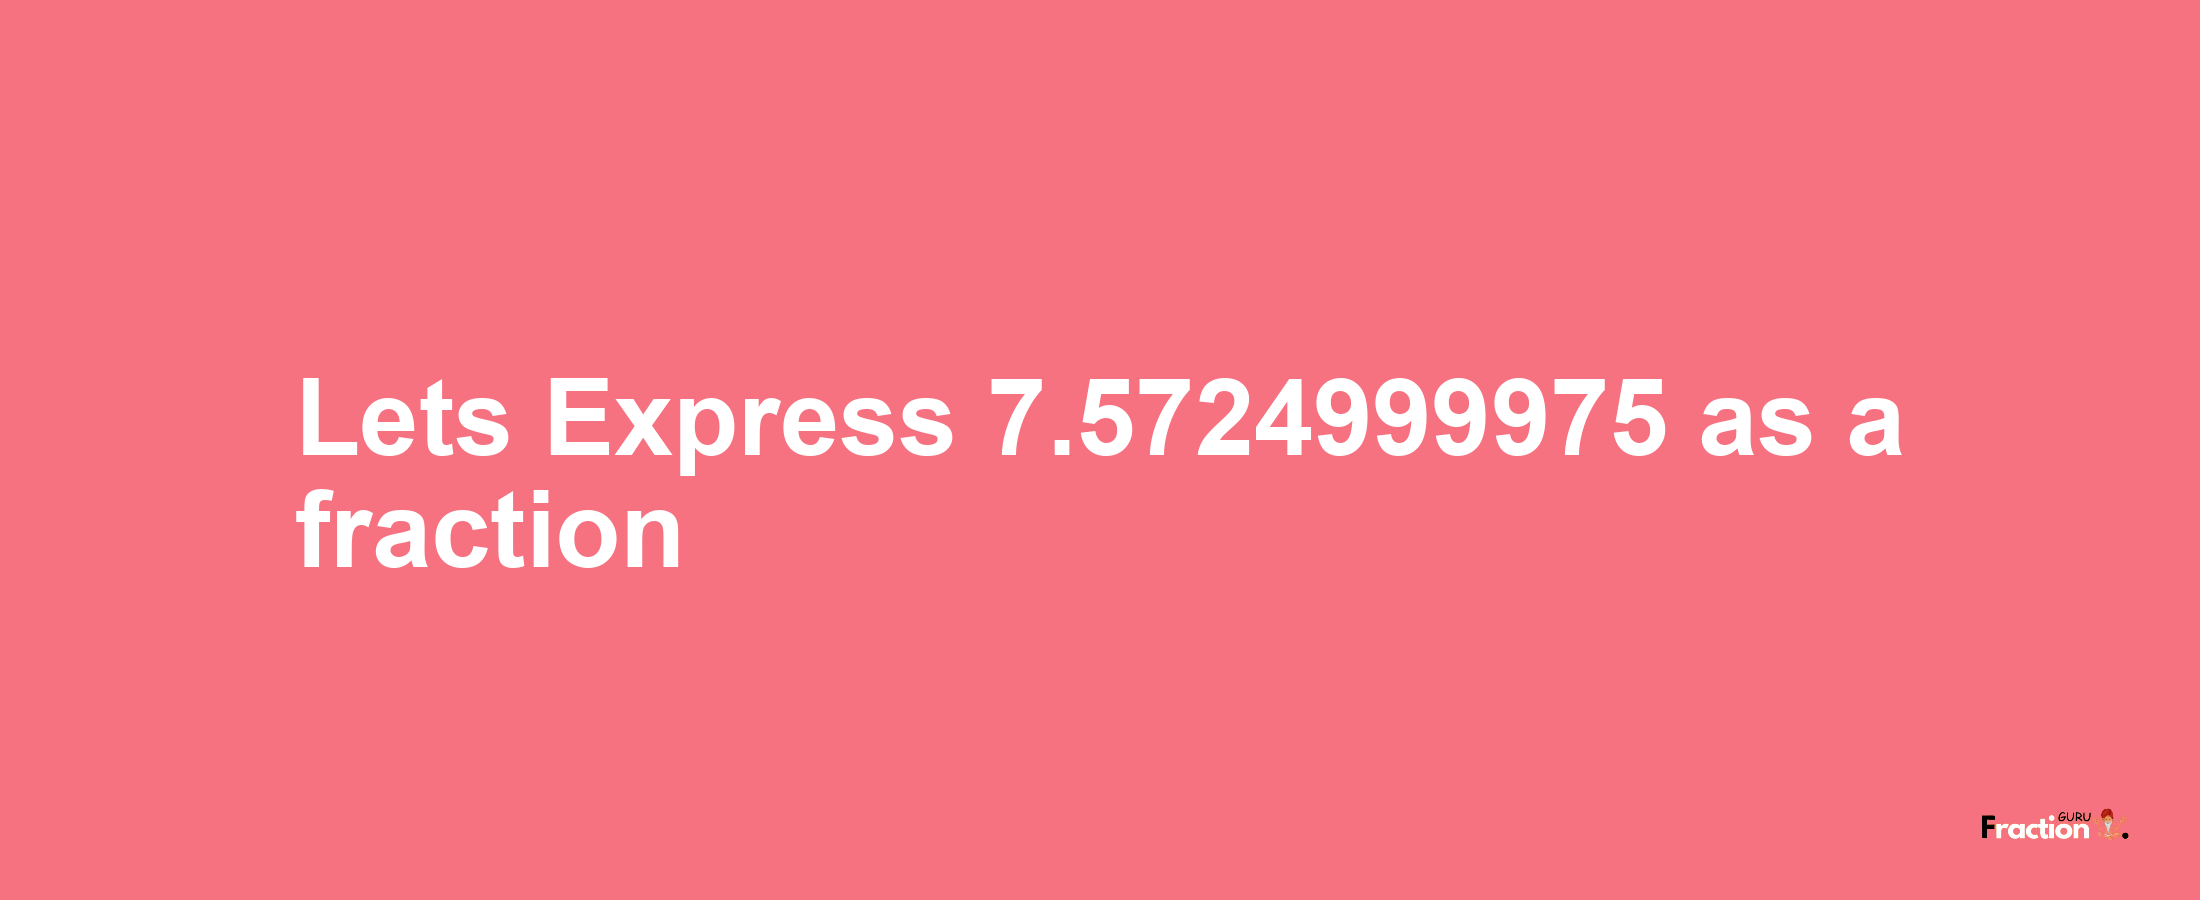 Lets Express 7.5724999975 as afraction